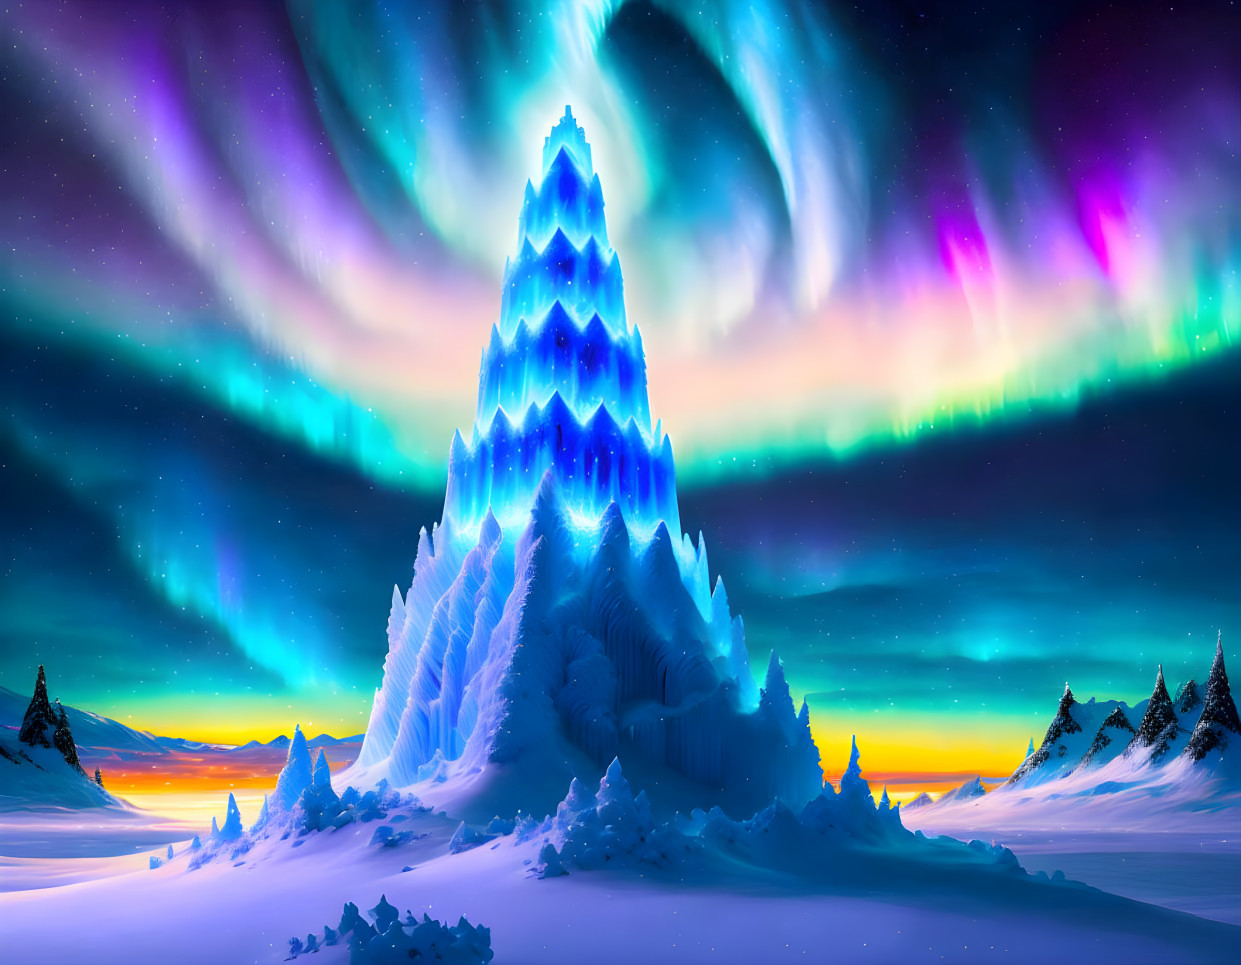 Blue Ice tower